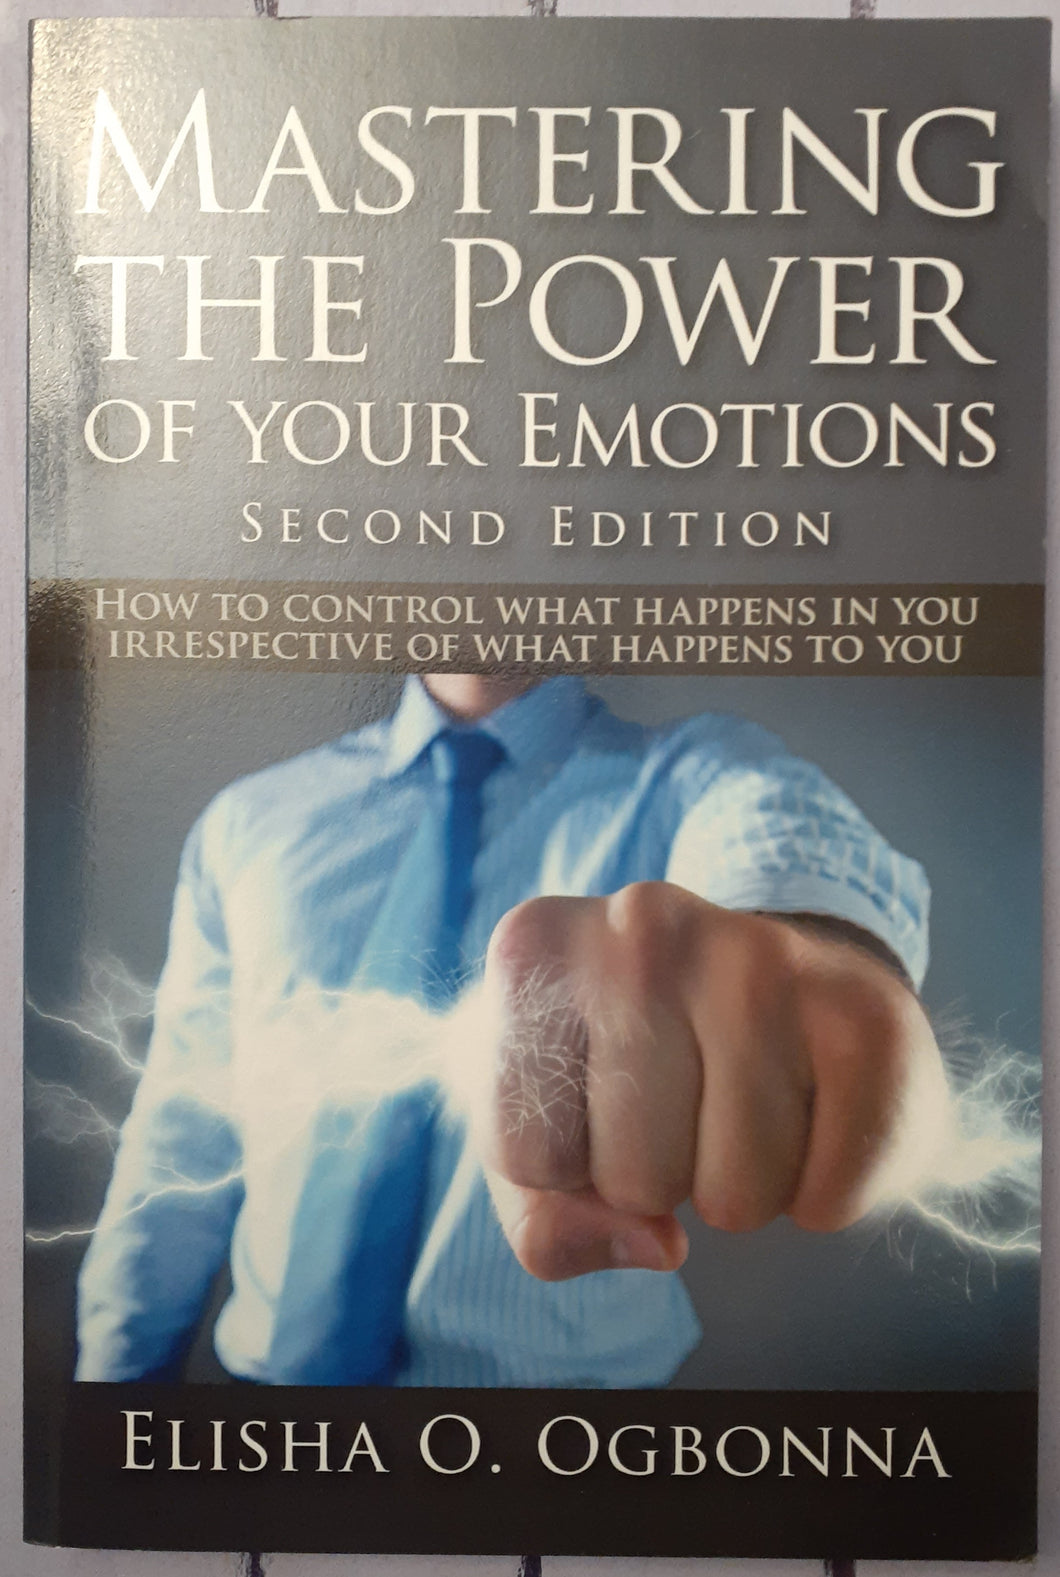 Mastering the Power of Your Emotions